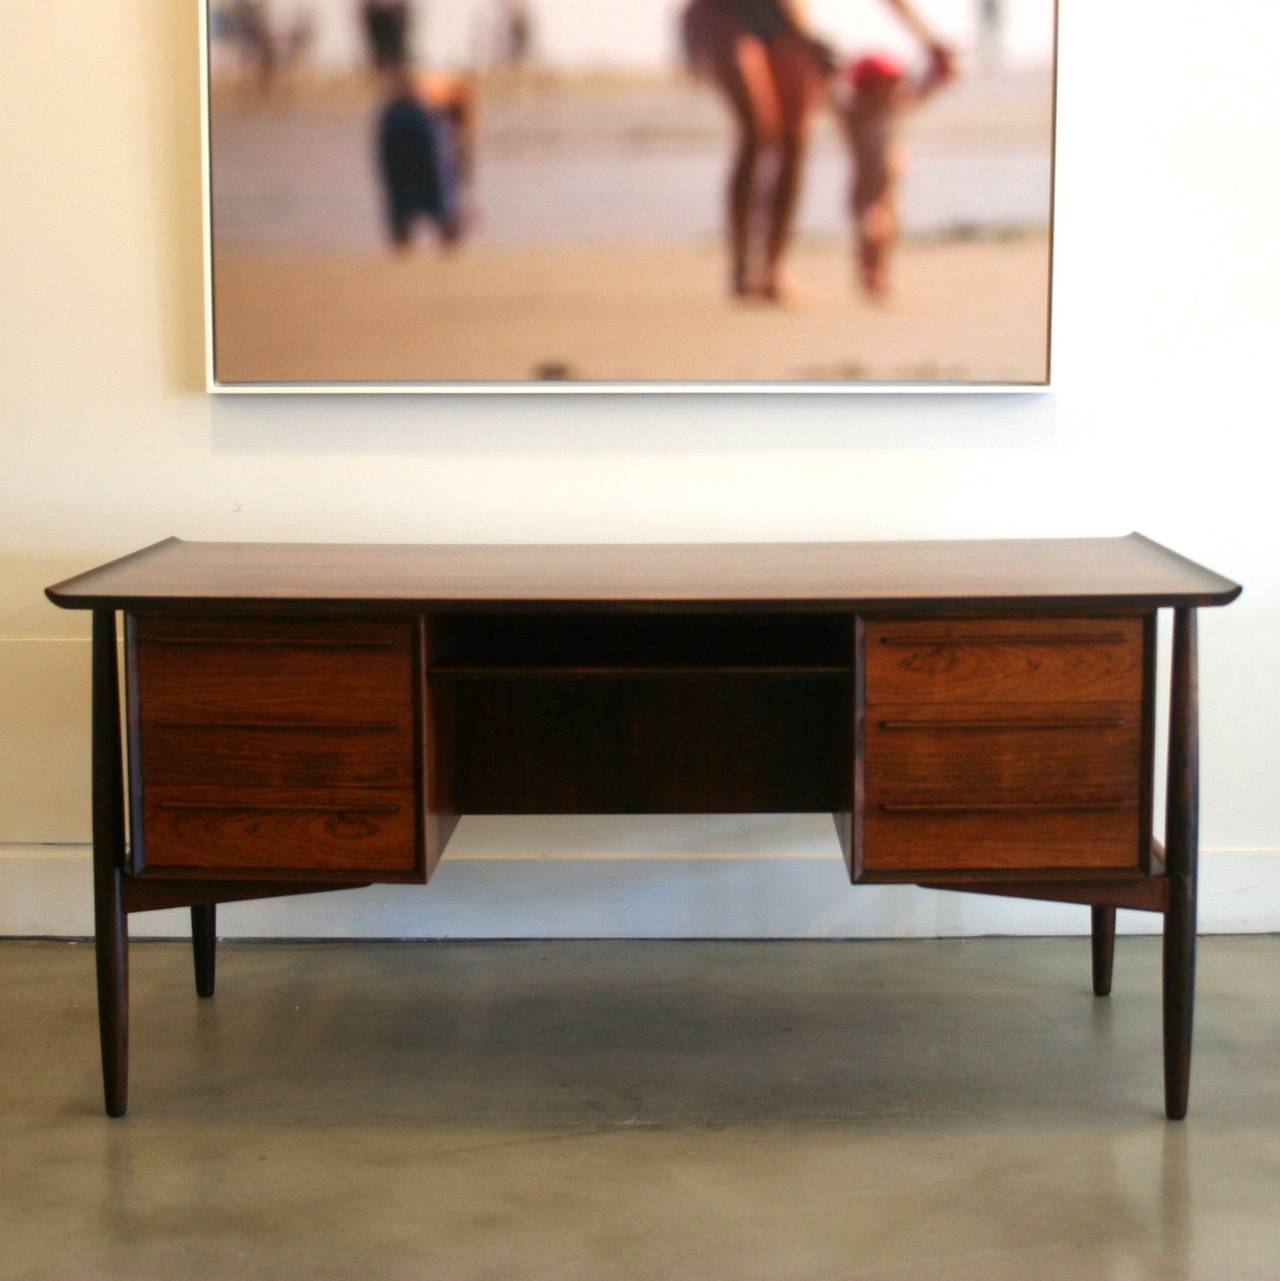 An exquisitely designed Danish modern desk by Gunni Omann with raised-lip edges. This piece features a stunning rosewood grain and rich colour. Framed by solid turned legs, the double bank of drawers feature dove-tailed construction and clean,